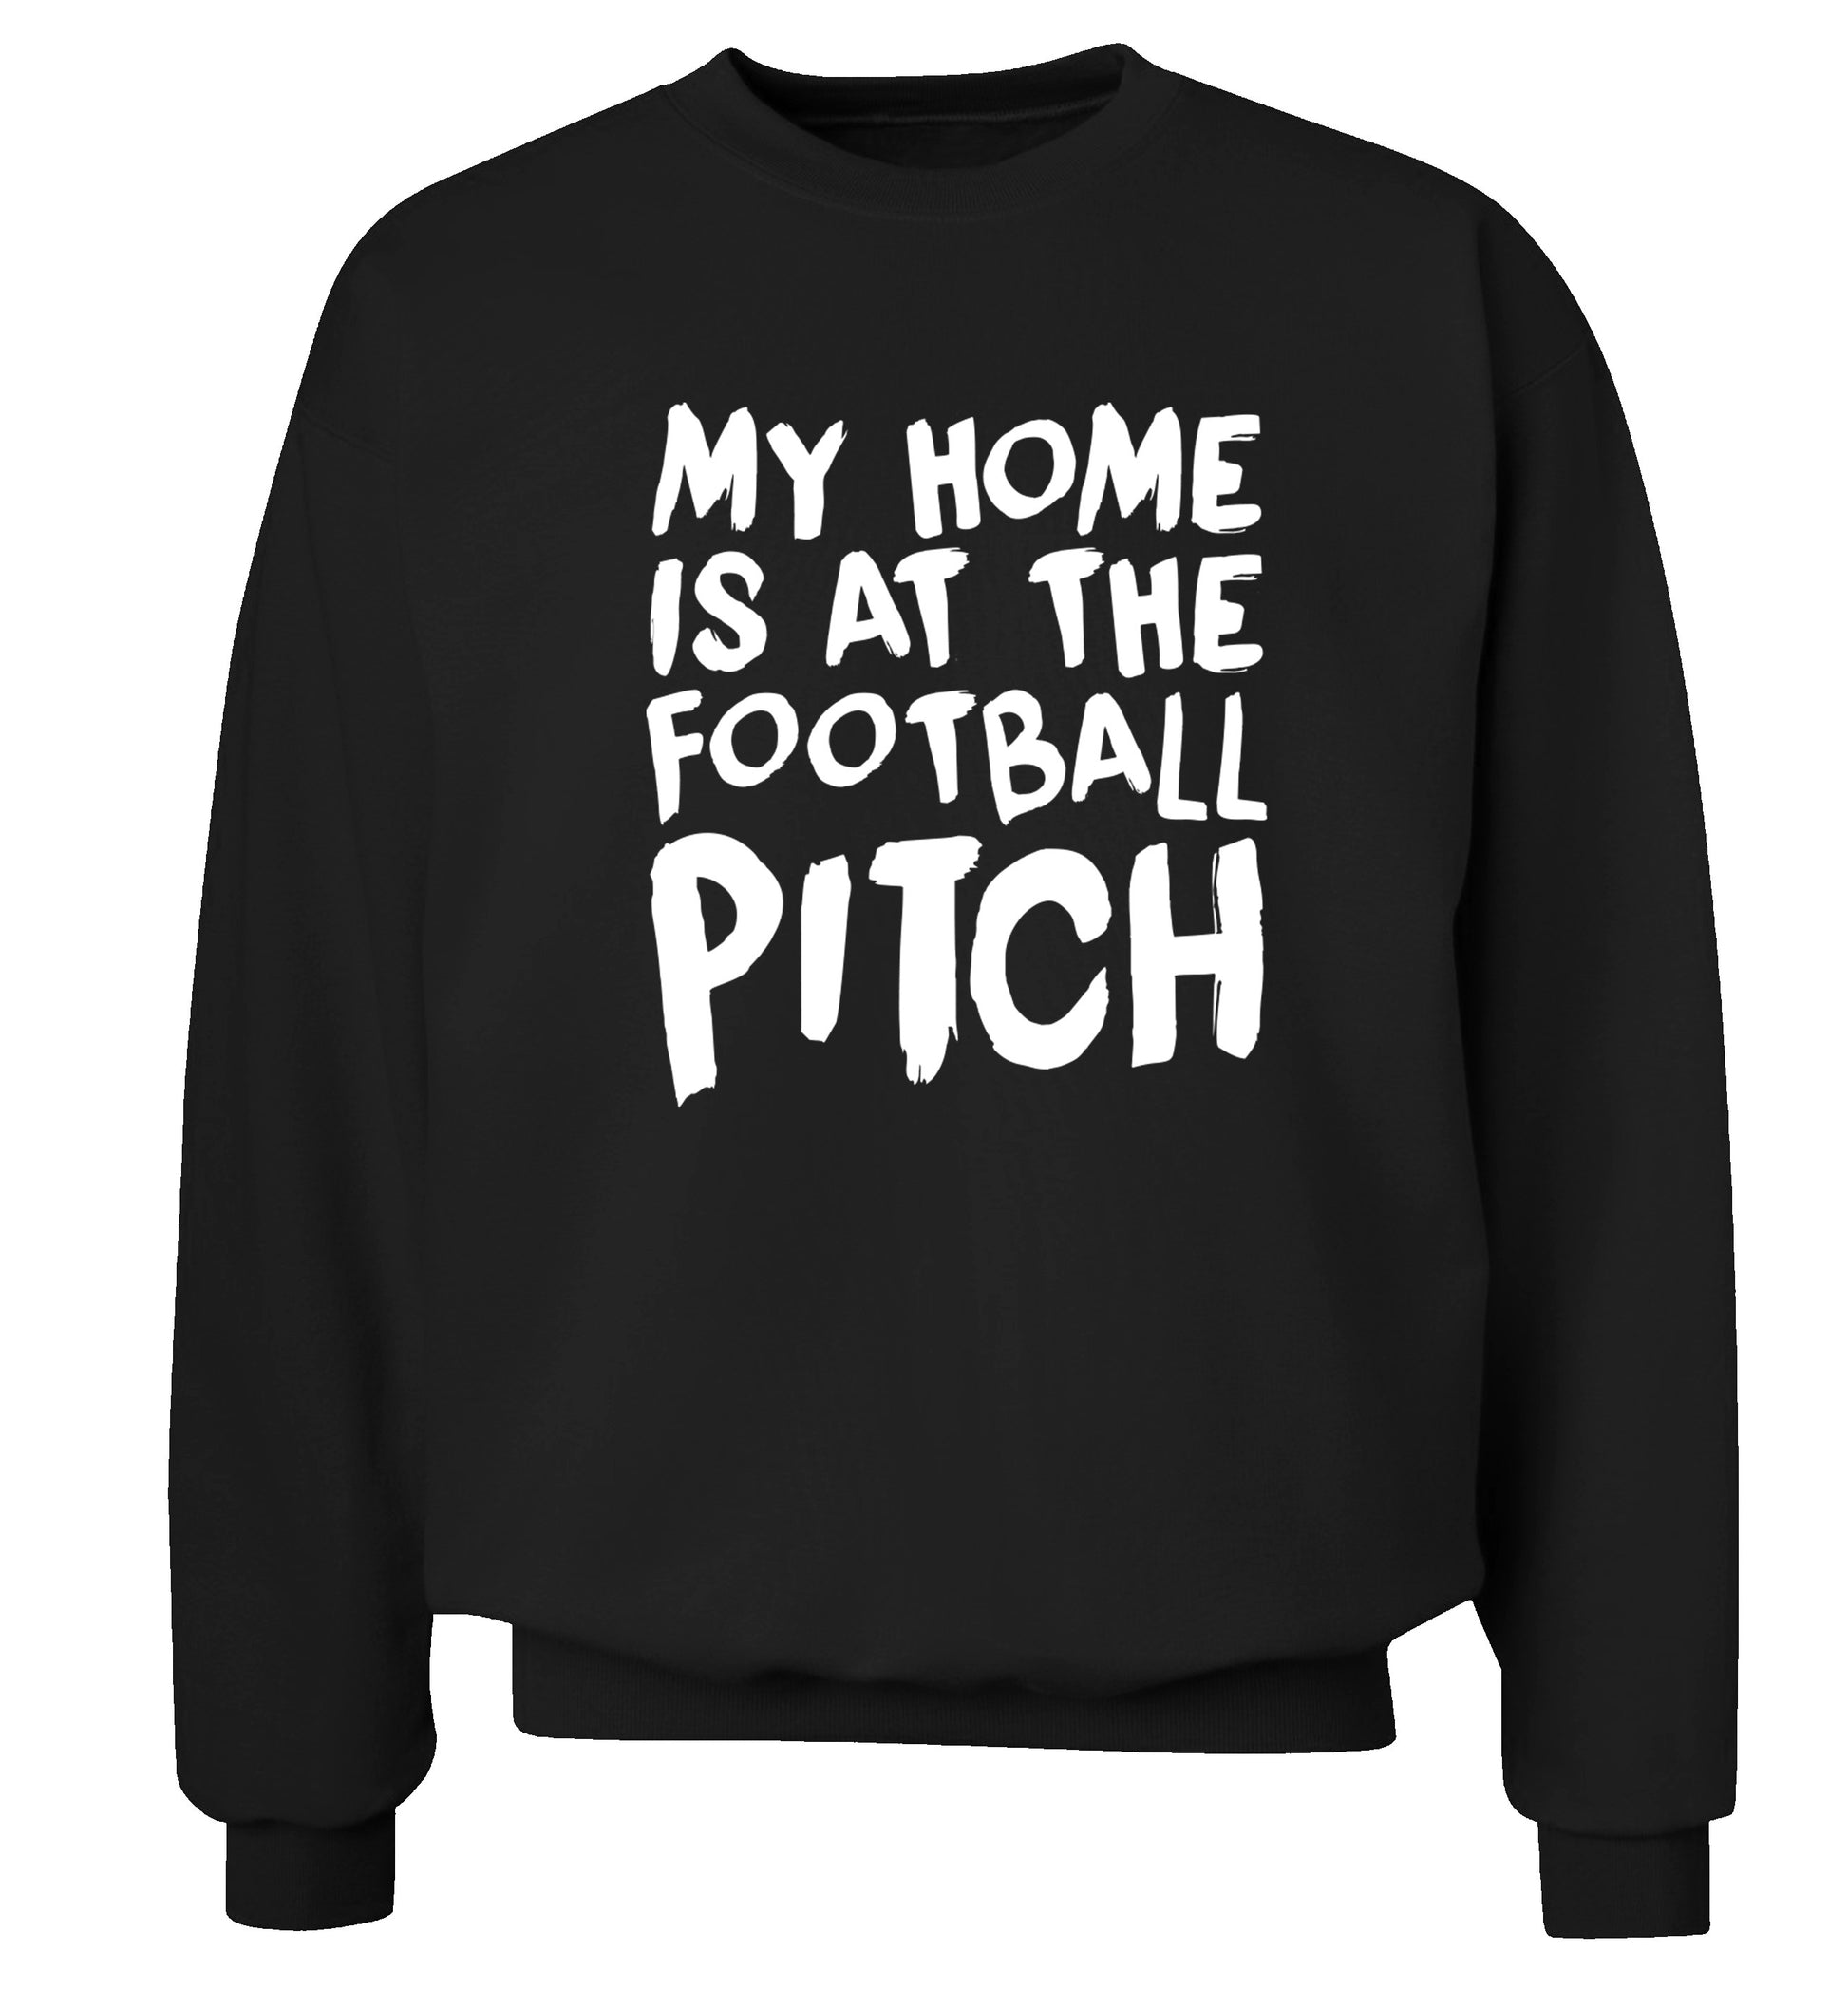 My home is at the football pitch Adult's unisex black Sweater 2XL